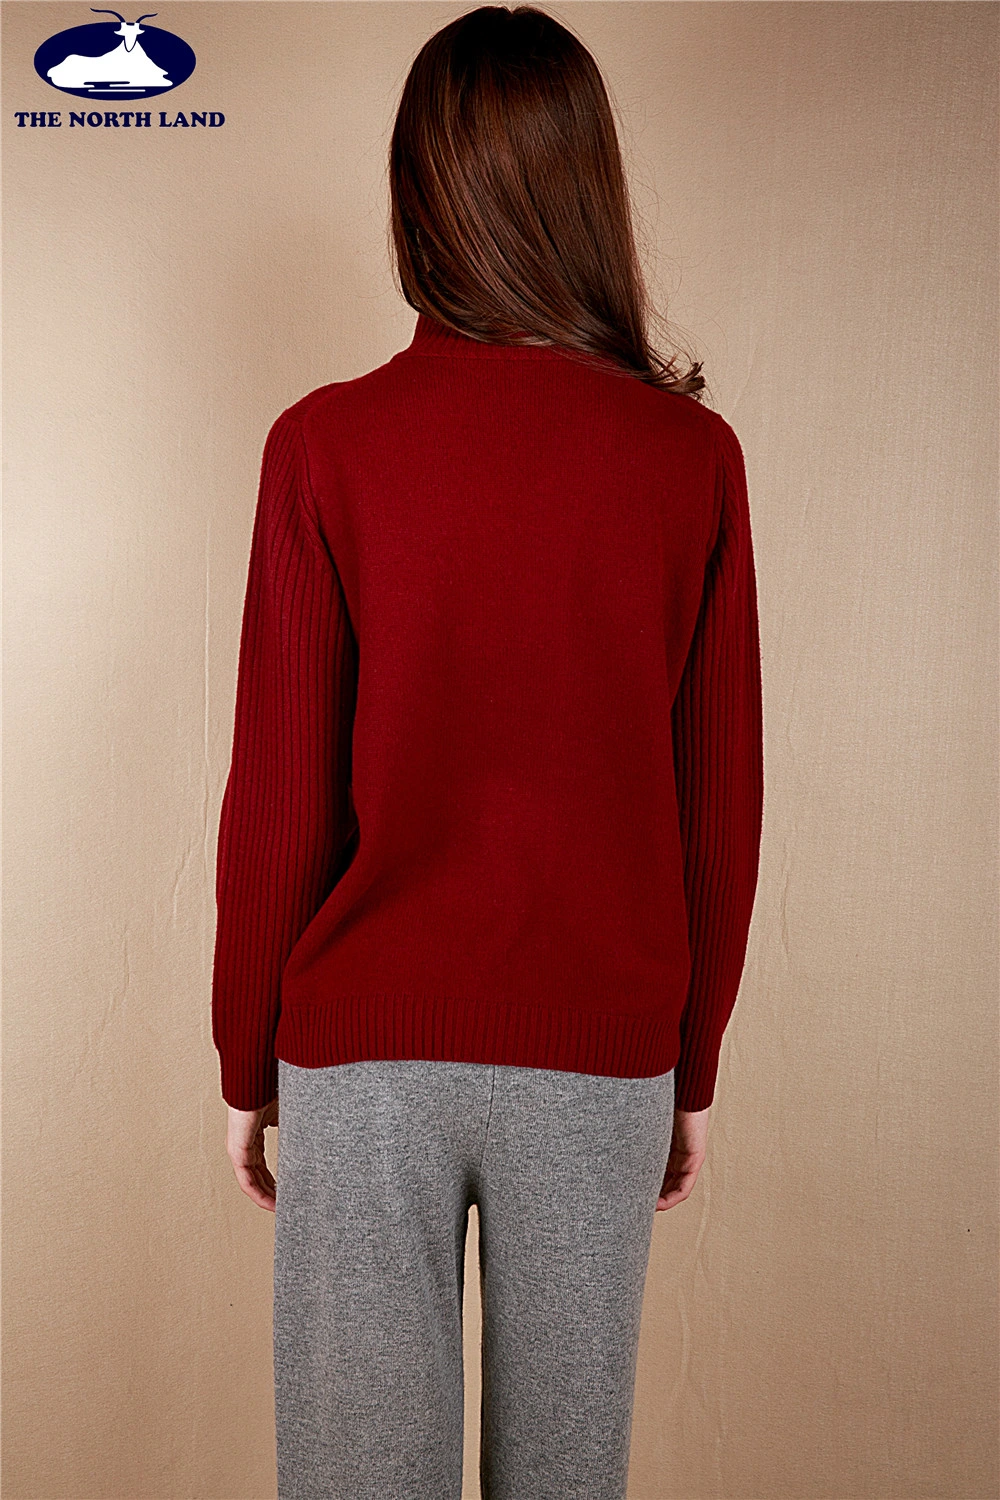 Cashmere High Neck Ribbed Cardigan with Zipper-Cashmere Sweater-Ladies Cashmere Sweater